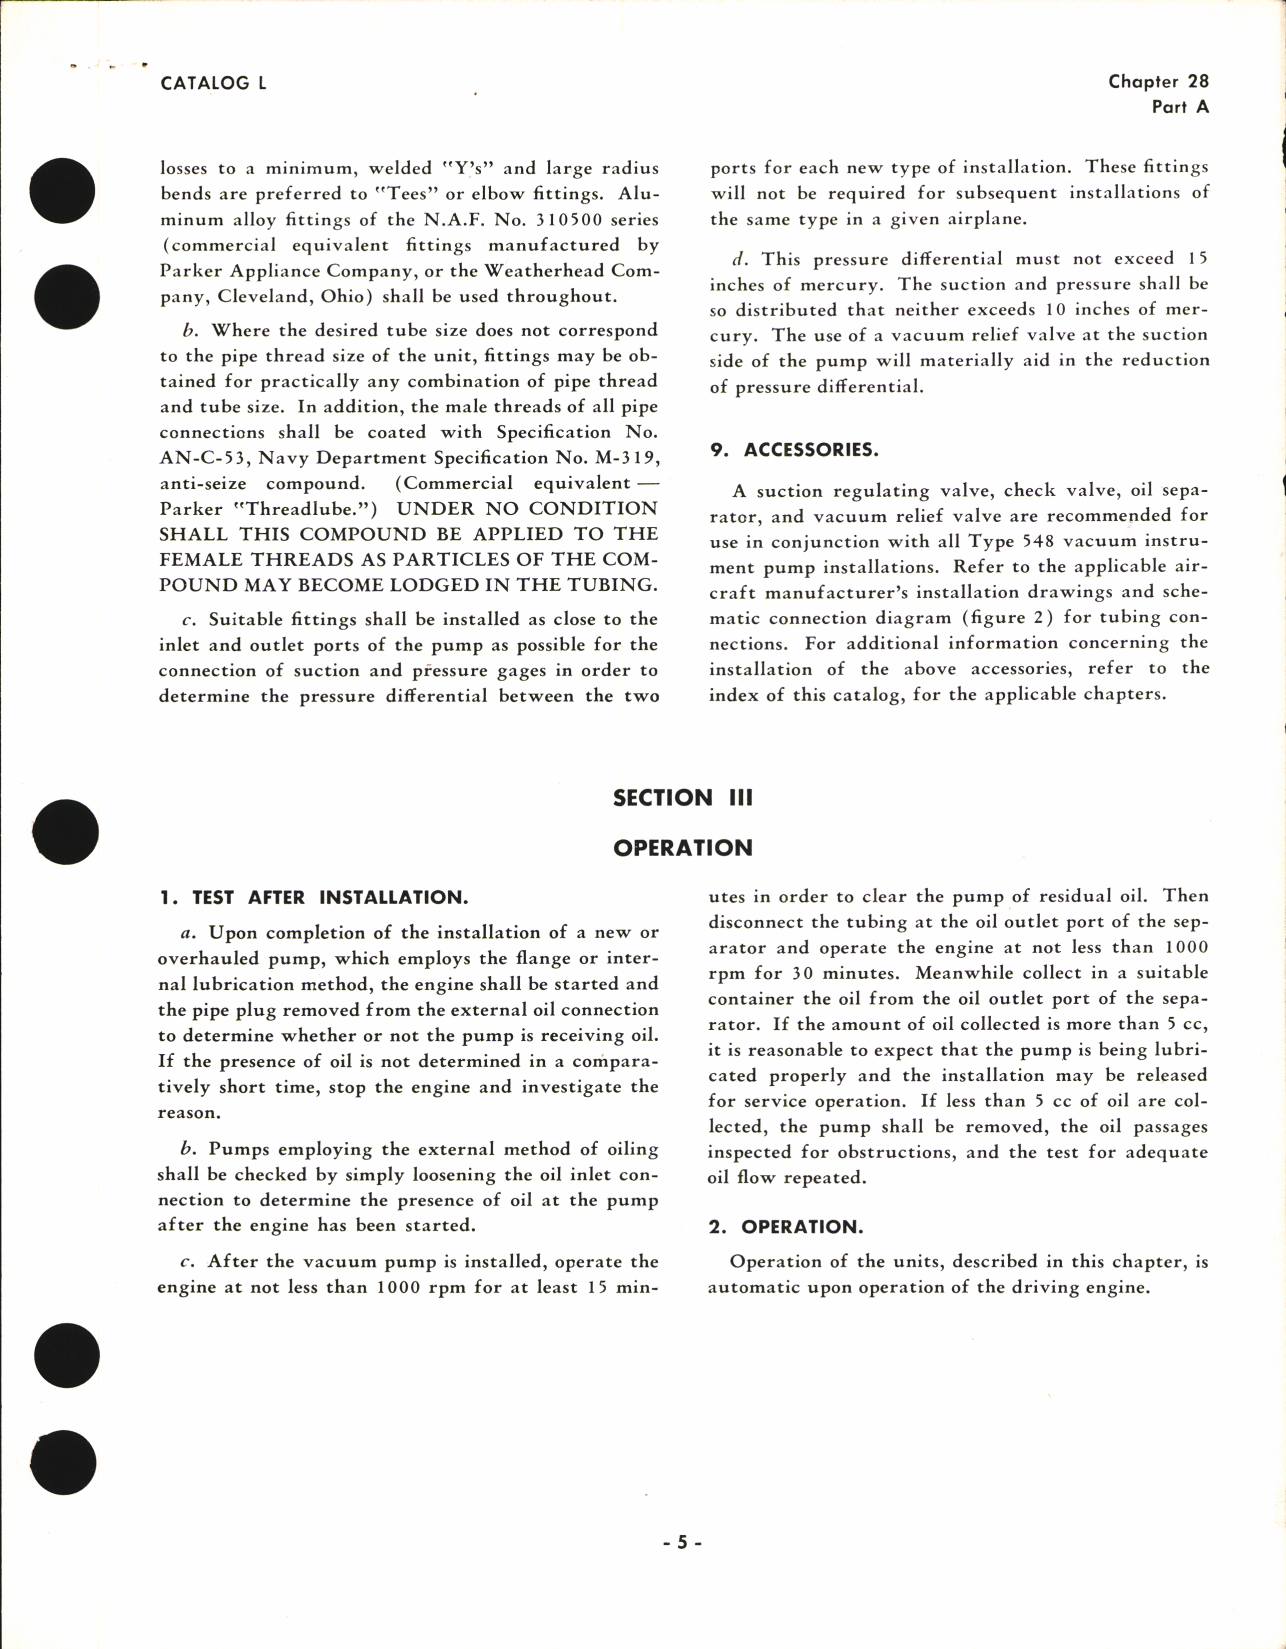 Sample page 5 from AirCorps Library document: Operating and Service Instructions for Eclipse Aviation Engine-Driven Air Pumps Type 548